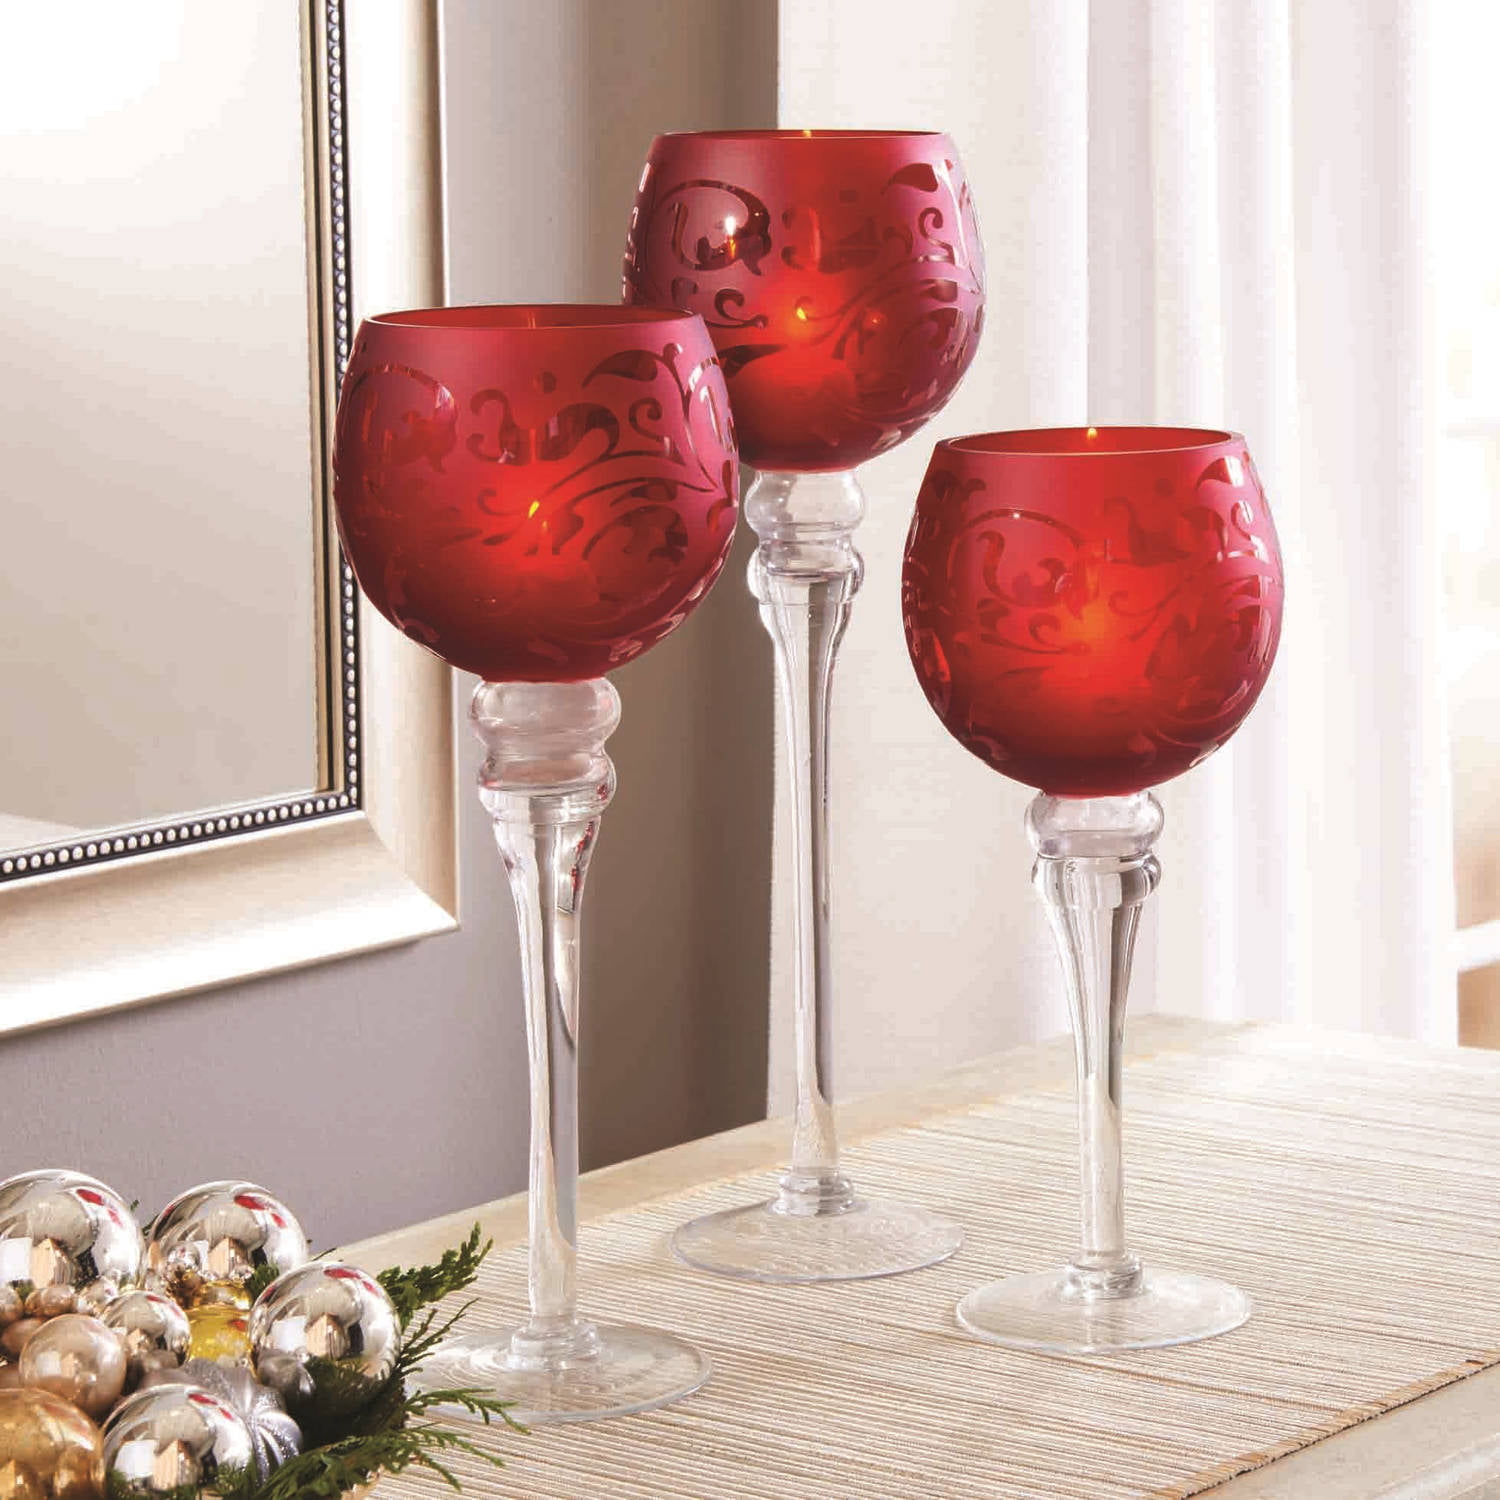 Better Homes & Gardens Clear Flared Red Wine Glass with Stem - 4 Pack